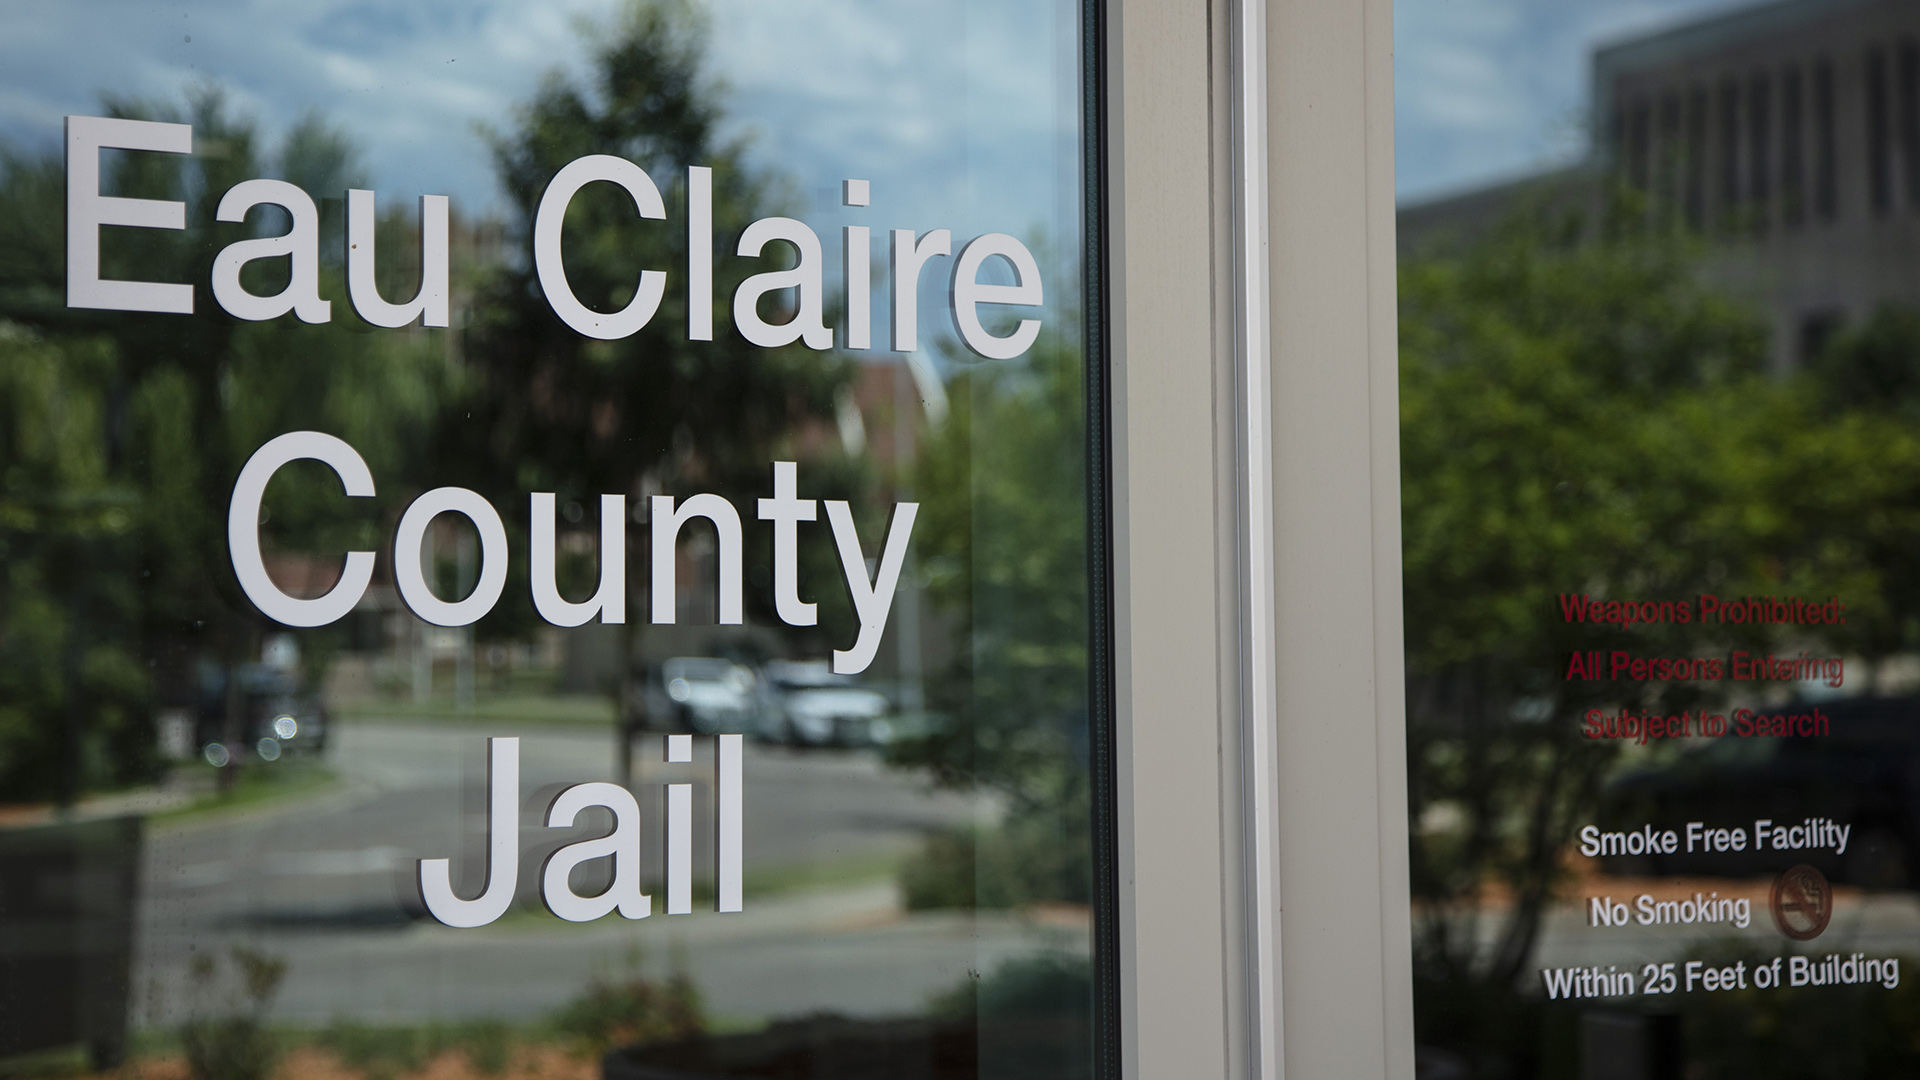 The words "Eau Claire County Jail" are stenciled on a glass pane in a door, with trees, parked cars and buildings visible in reflection.